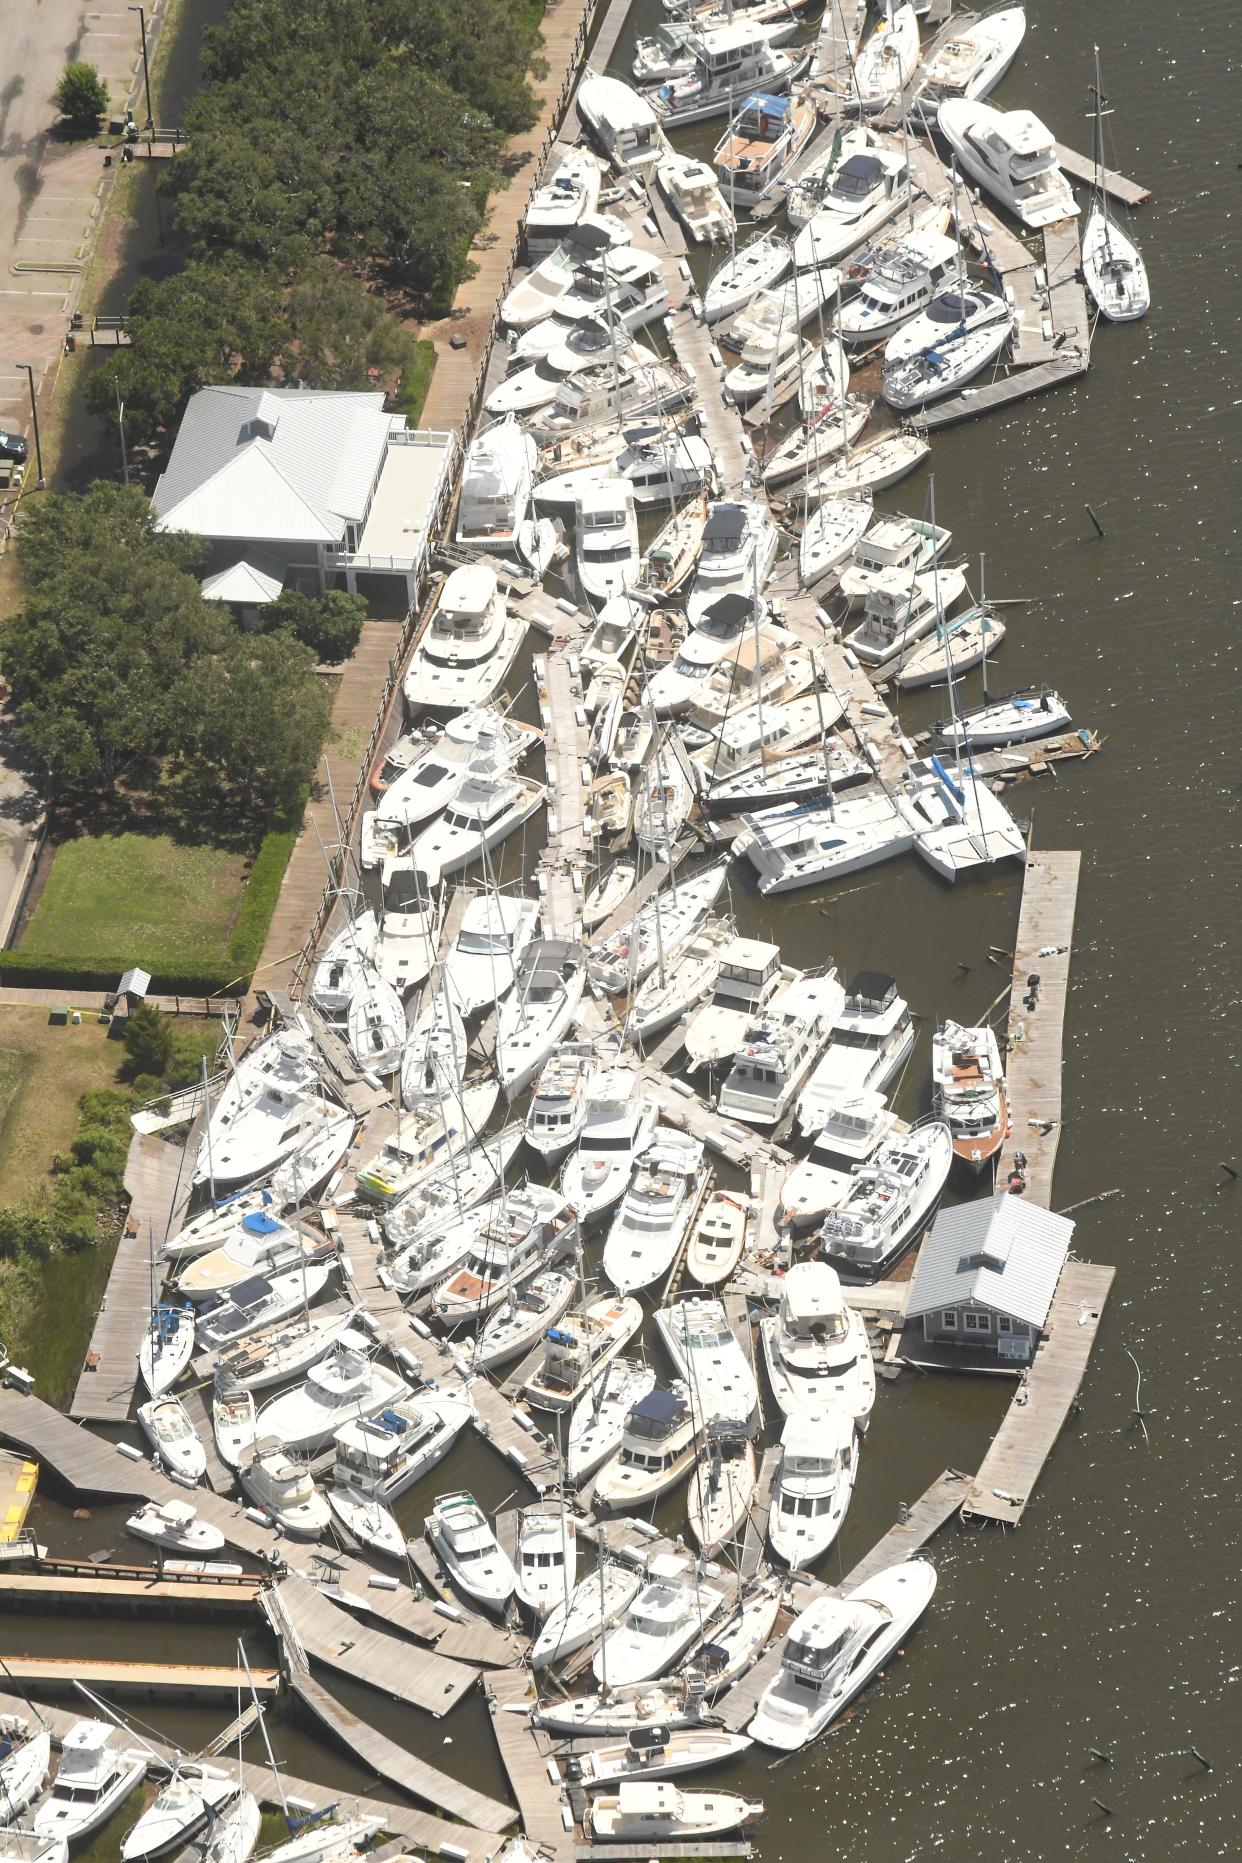 An aerial view of the boat wreckage at Southport Marina after Hurricane Isaias hit Southeastern North Carolina in August 2020.